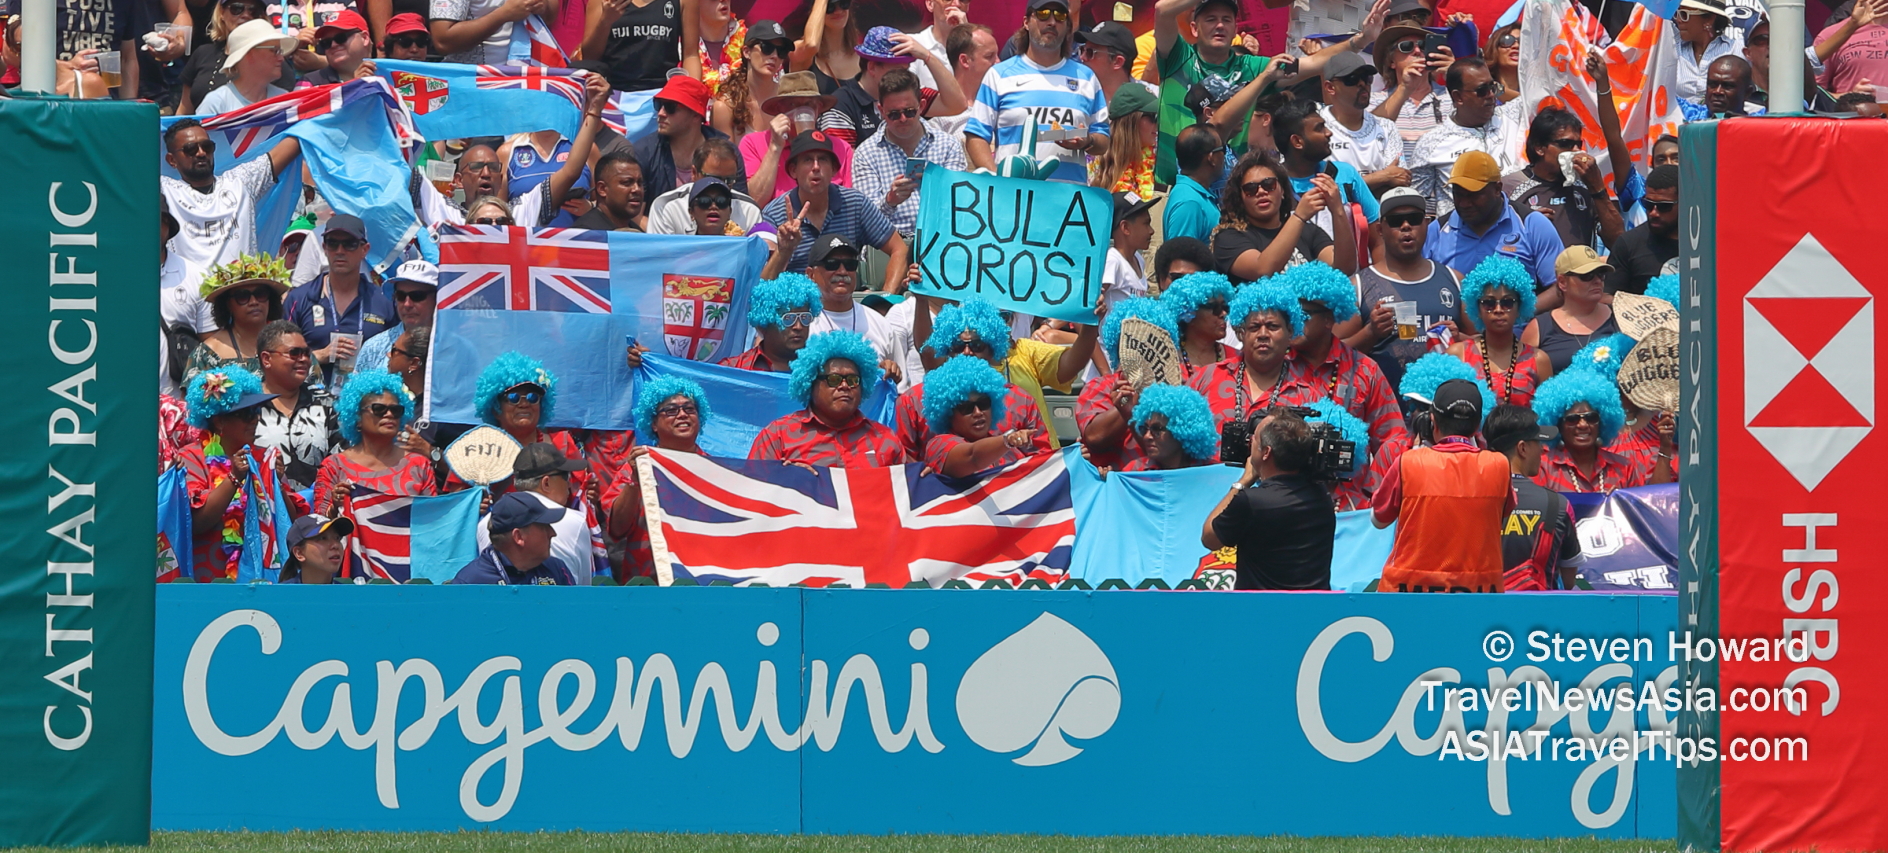 Fiji fans and others at the HK7s in 2019. Picture by Steven Howard of TravelNewsAsia.com Click to enlarge.